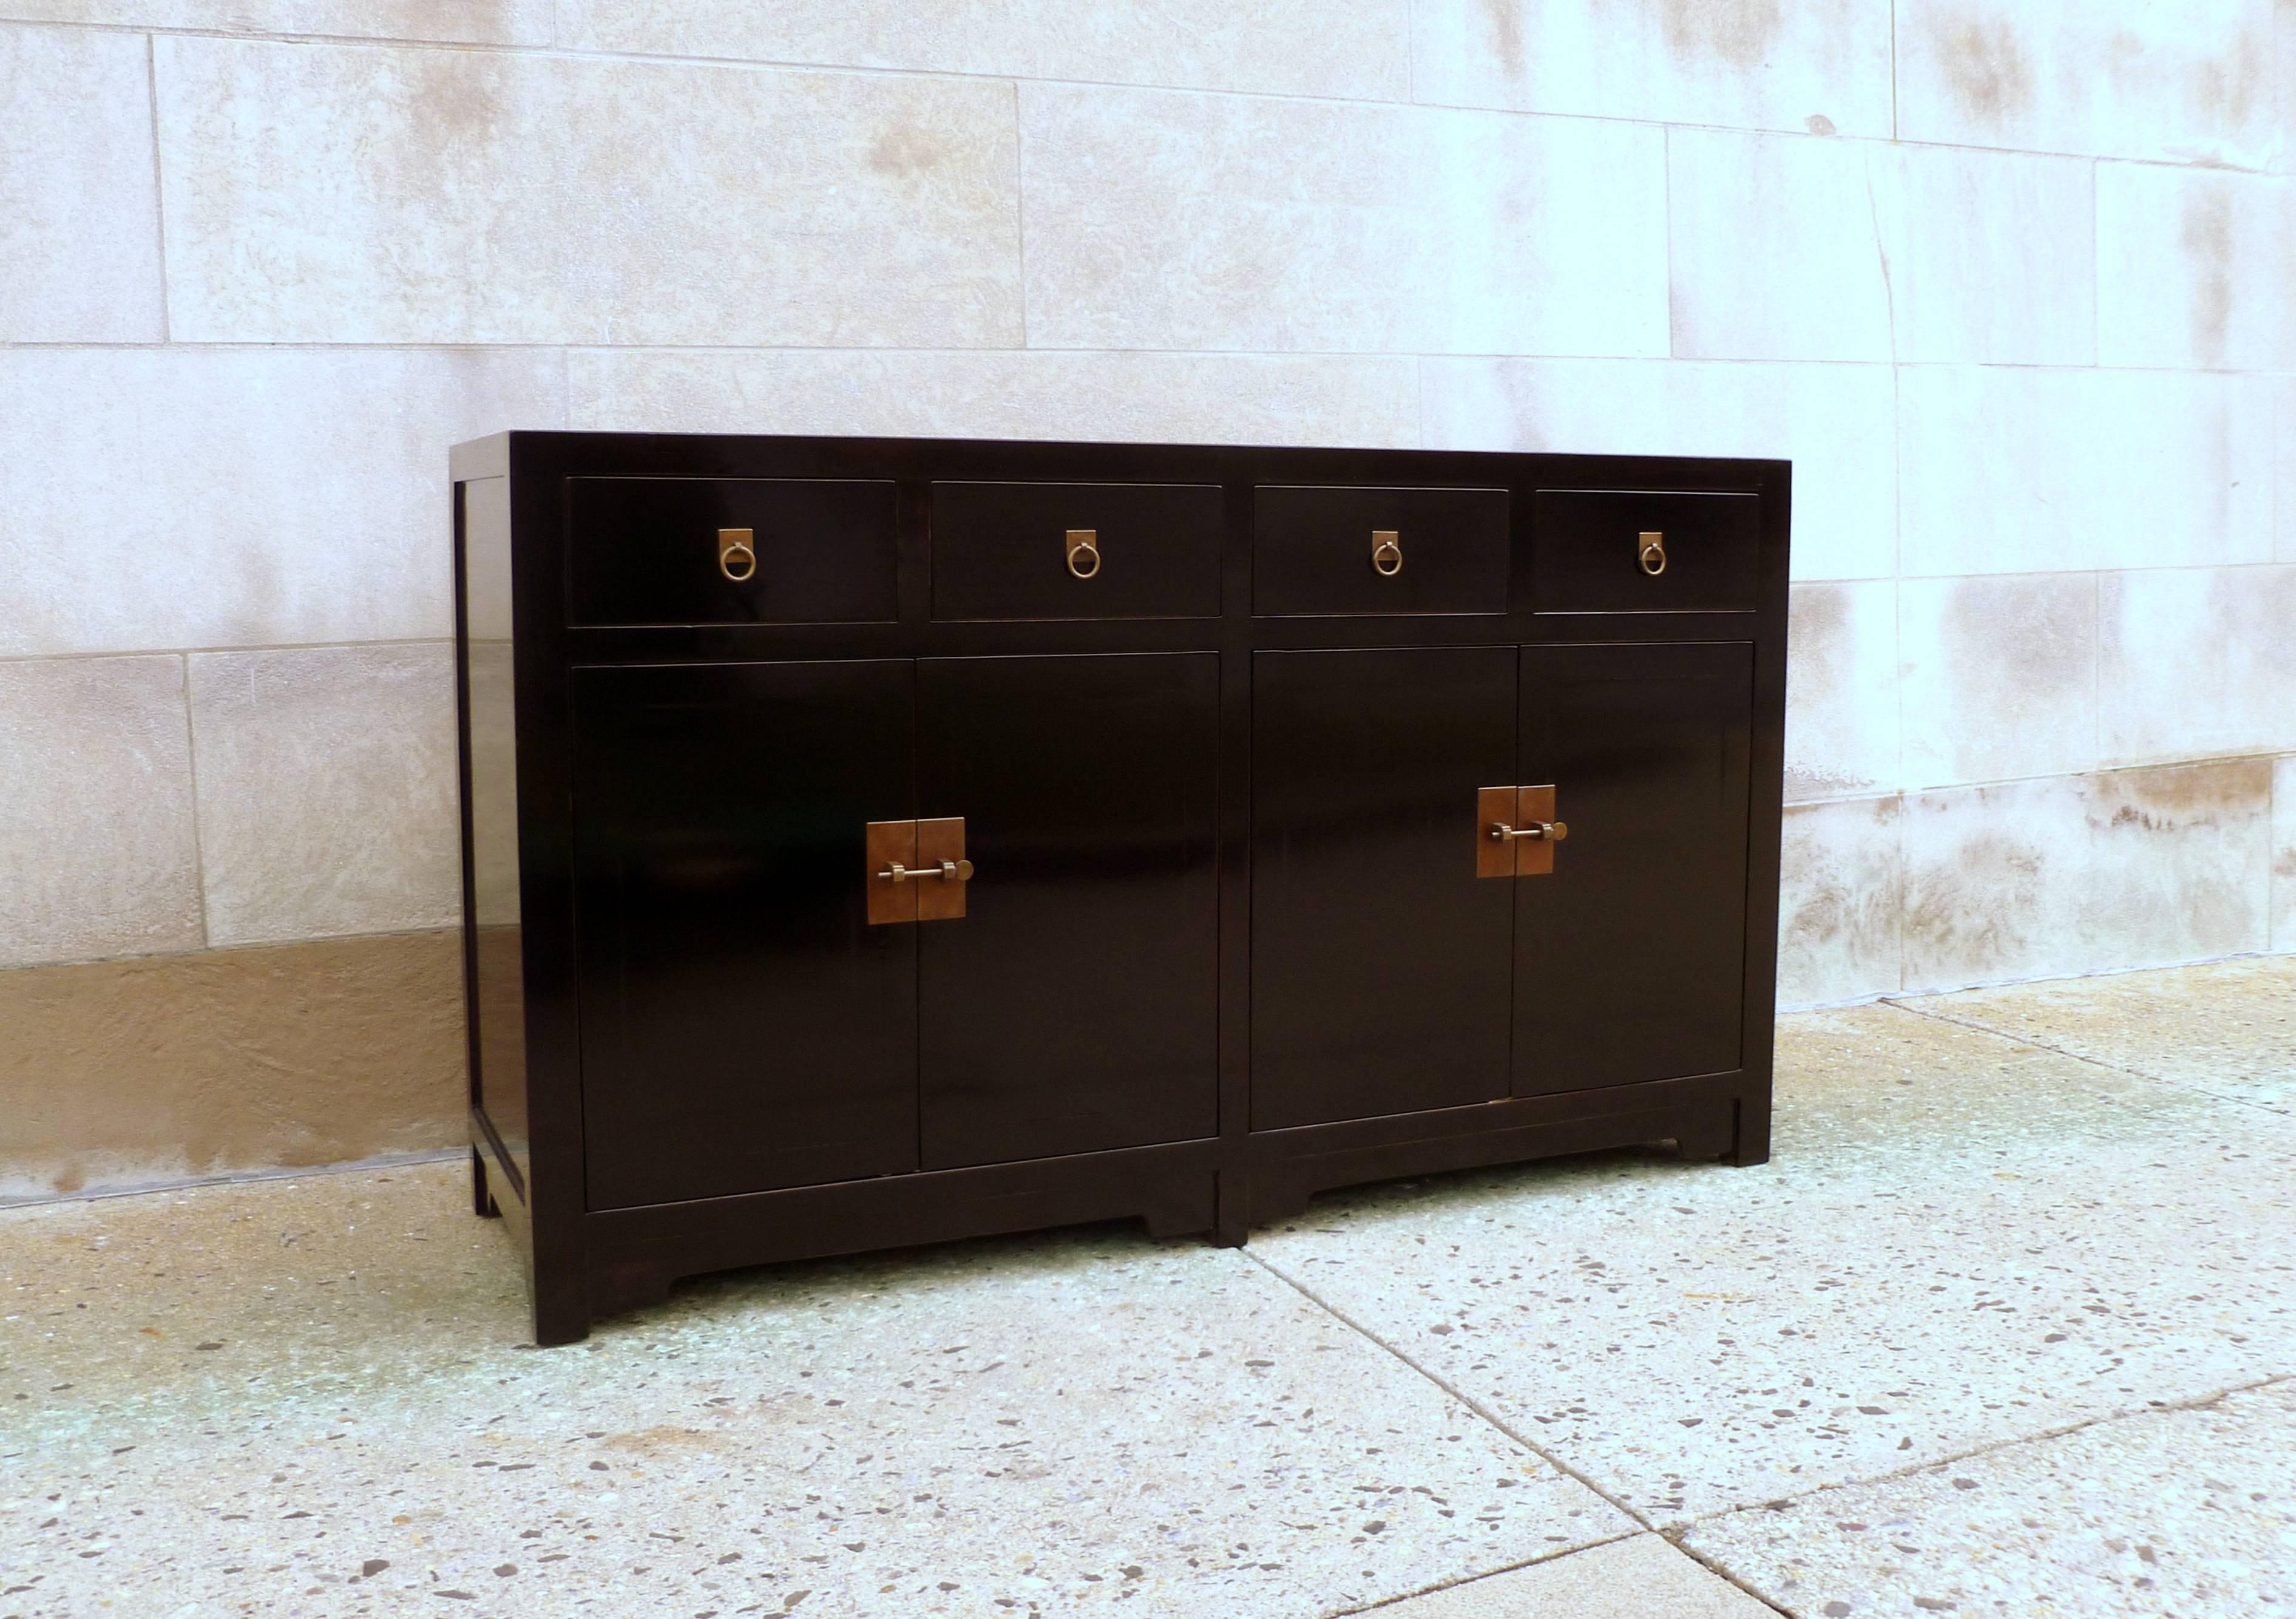 Polished Fine Black Lacquer Sideboard with Drawers and Doors